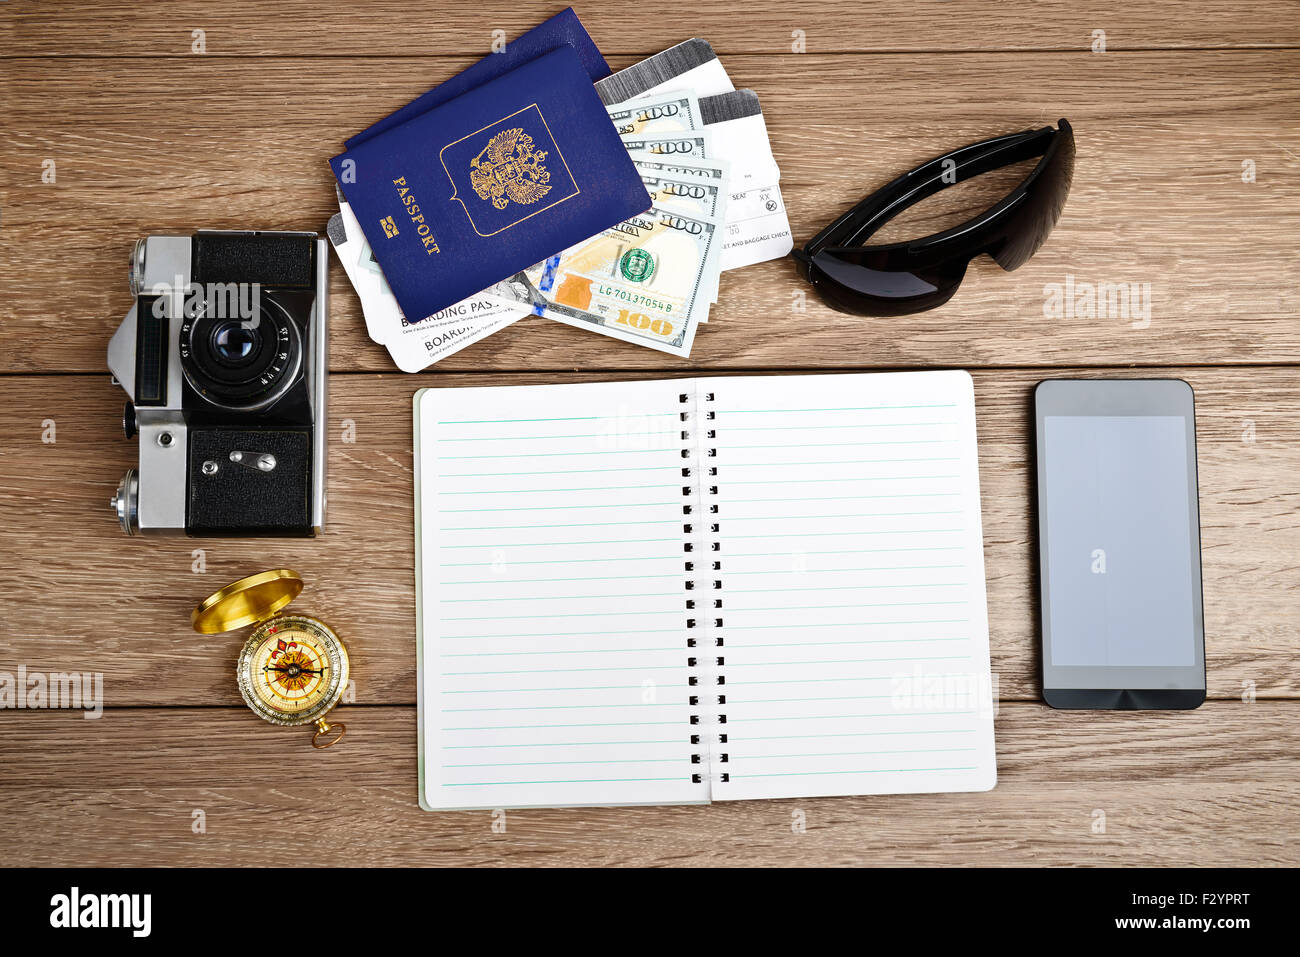 Business travel and tourism concept: air tickets or boarding pass, passports, smartphone, compass, vintage camera, sunglasses Stock Photo